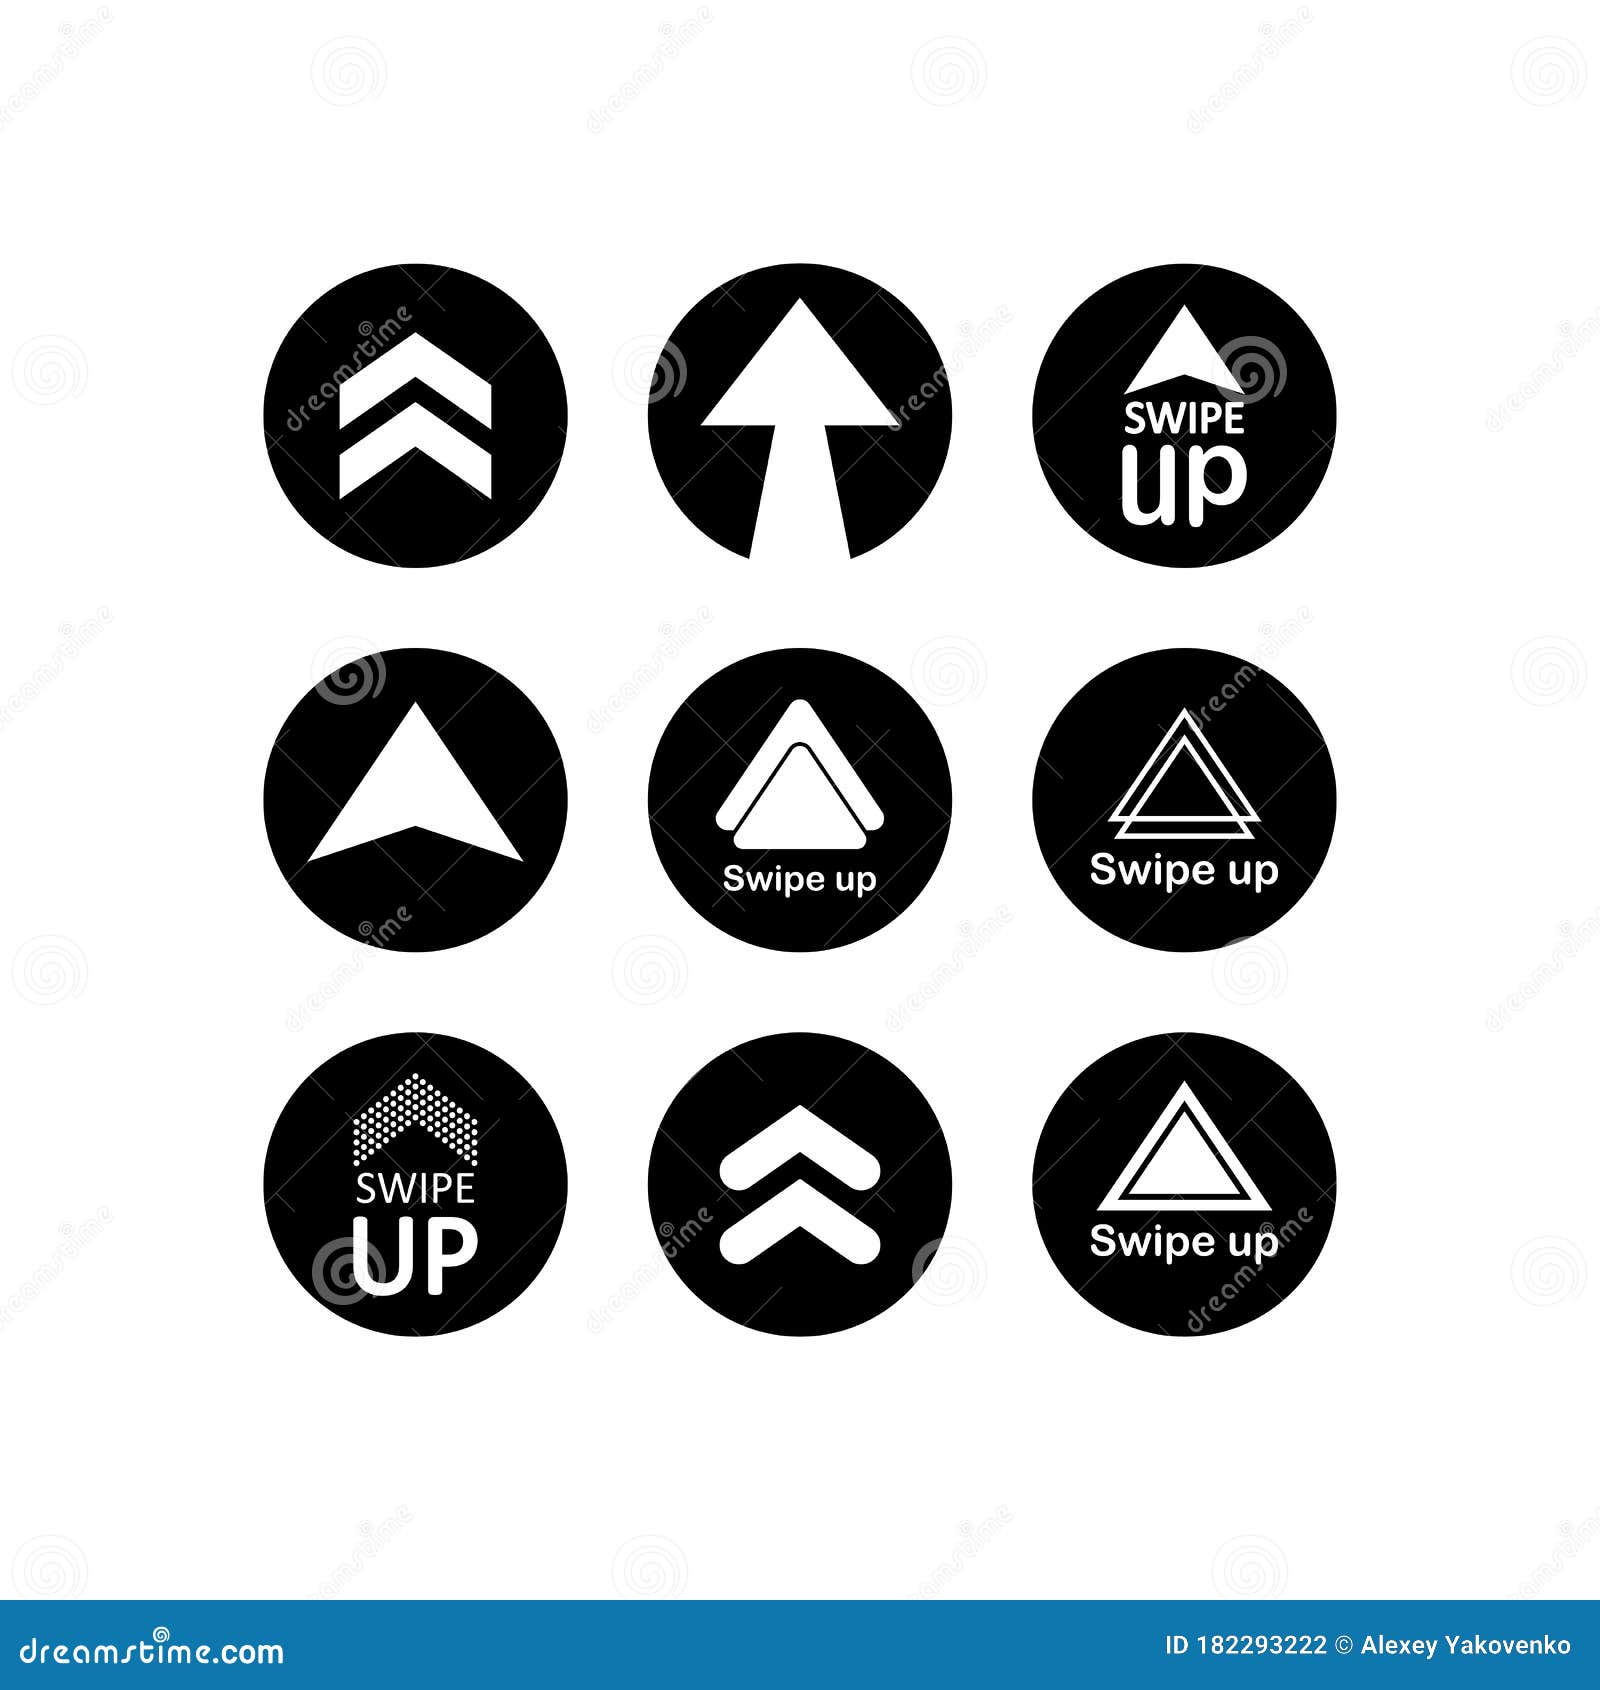 swipe up, arrow up icon modern button for web or appstore  black   on white background.  eps 10